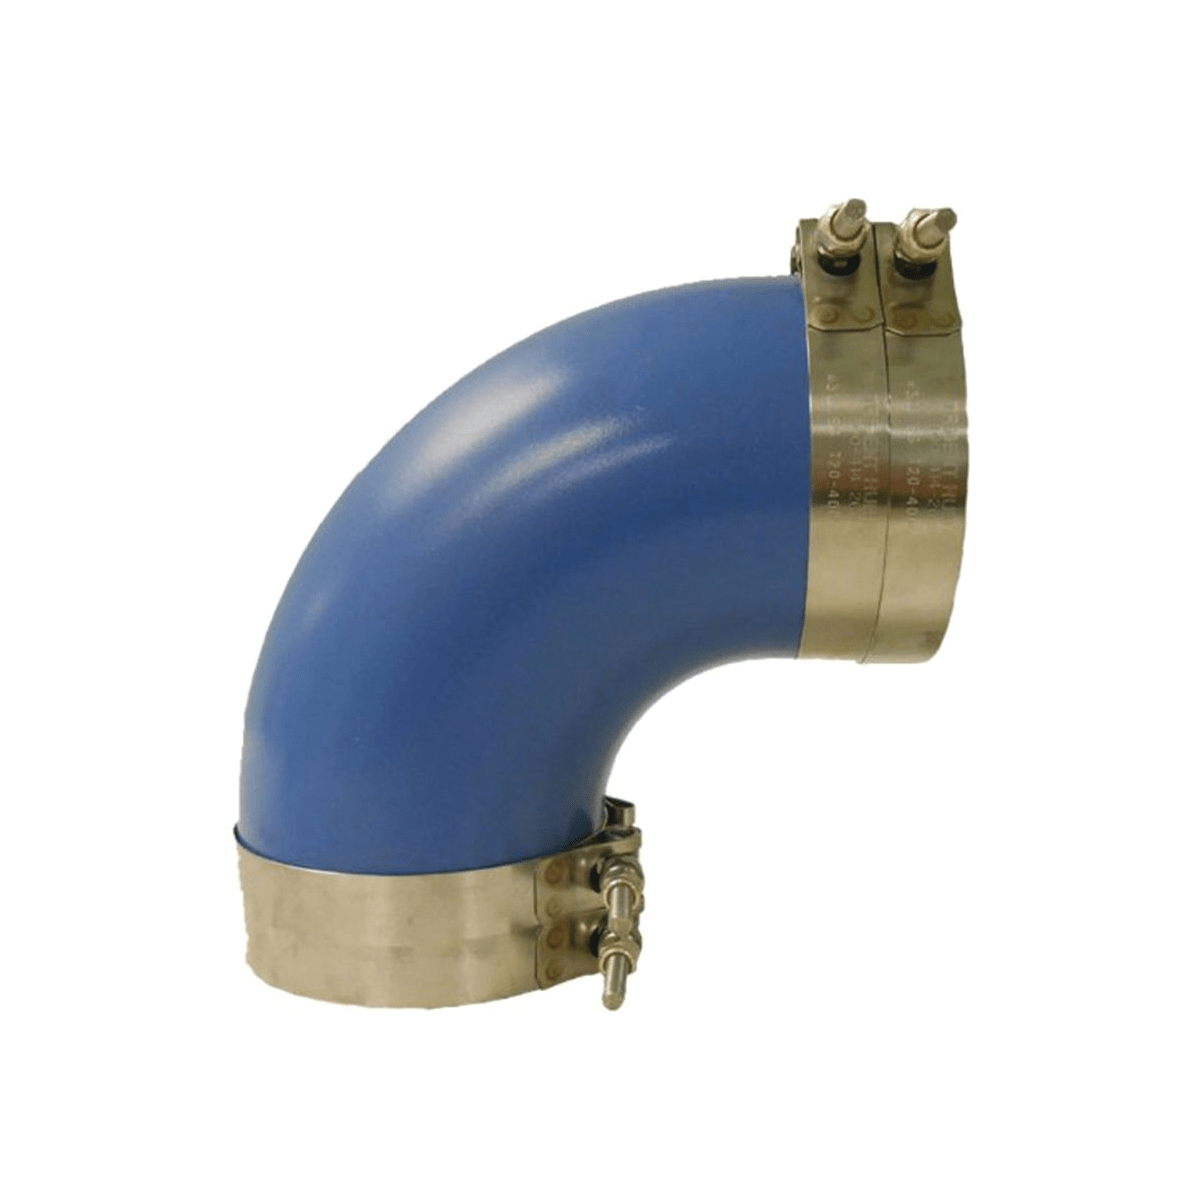 6 350-Degree Fahrenheit Trident Marine 290V6000-S/S Molded Silicone Wet Exhaust 90-Degree Elbow with Clamps 